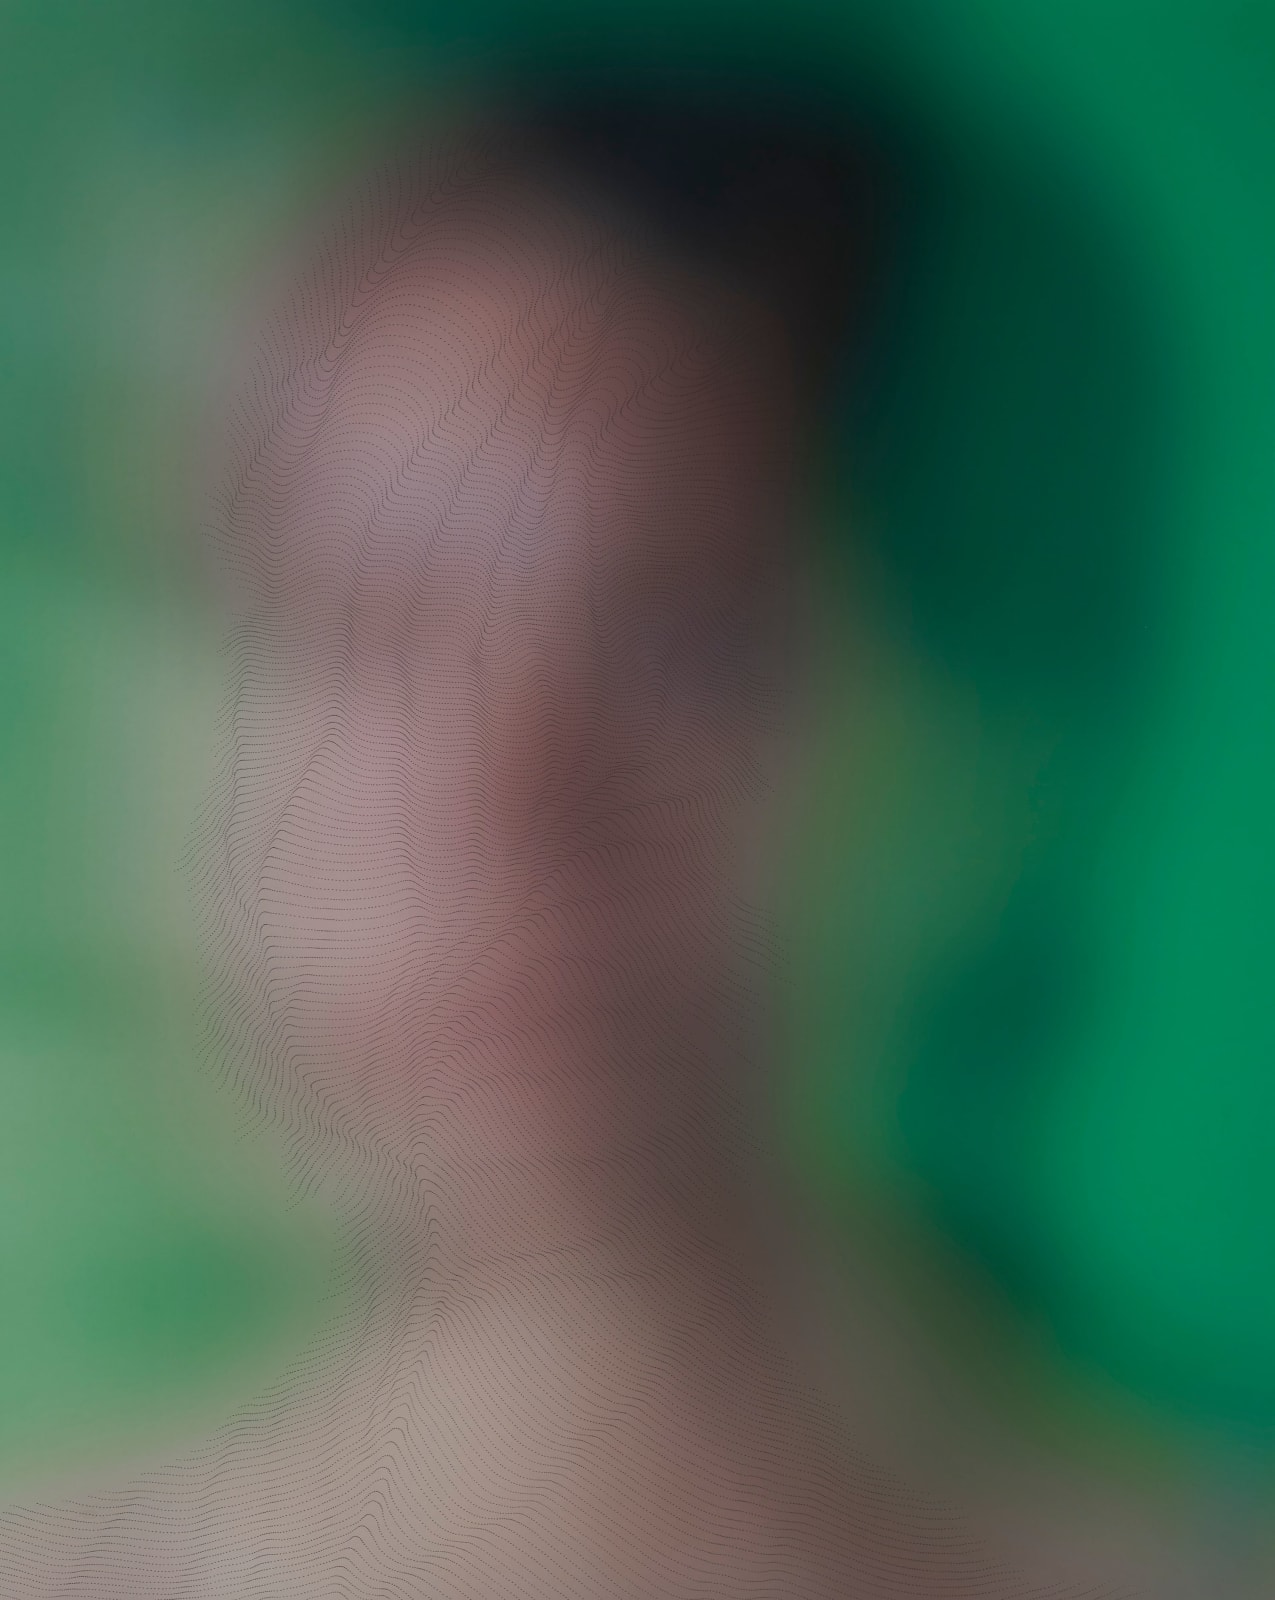 Sebastiaan Bremer, Portrait of Sophie 3, blurry portrait of dark haired woman in front of green background with drawing on top